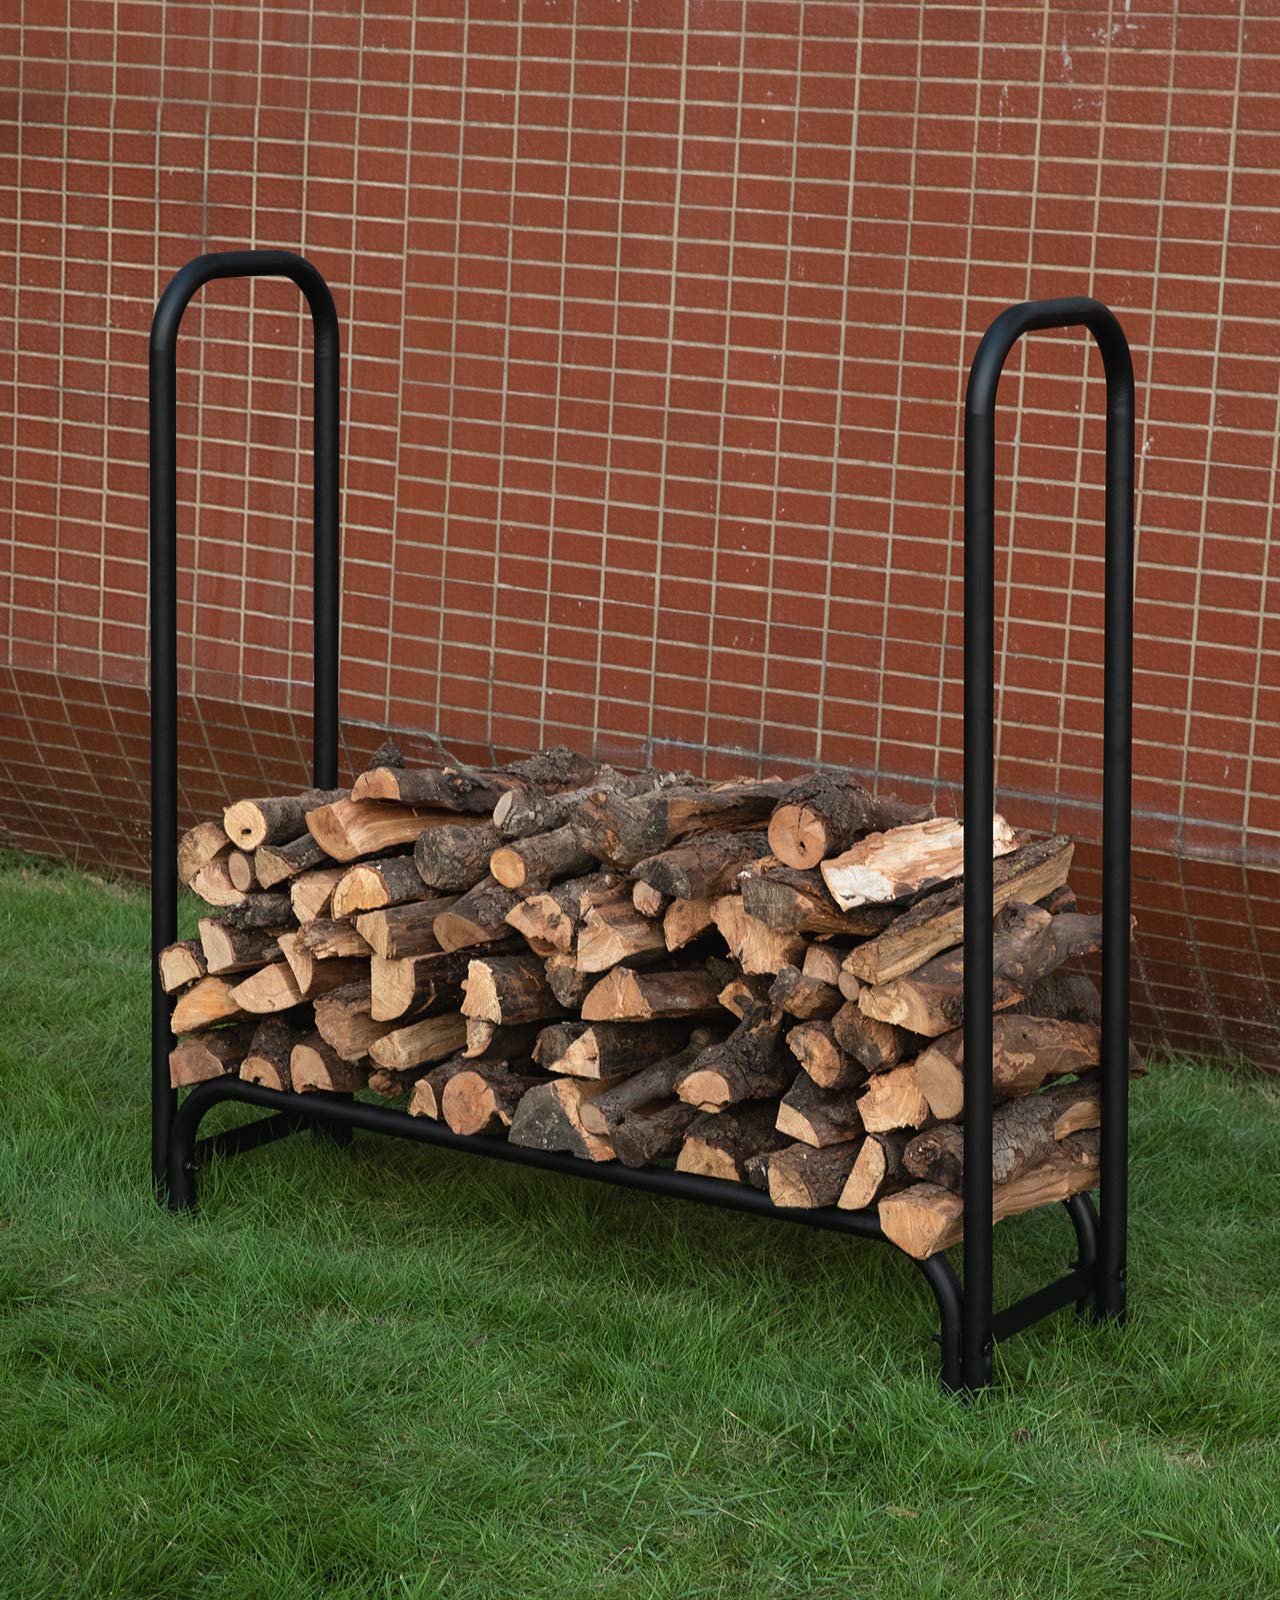 GASPRO Firewood Rack Indoor and 4FT Firewood Rack Outdoor with Cover, 5 Pcs Wrought Iron Fireplace Tools and Log Holder for Fireplace, Wood Stove, Hearth, Fire Pit, Sturdy and Easy to Assemble